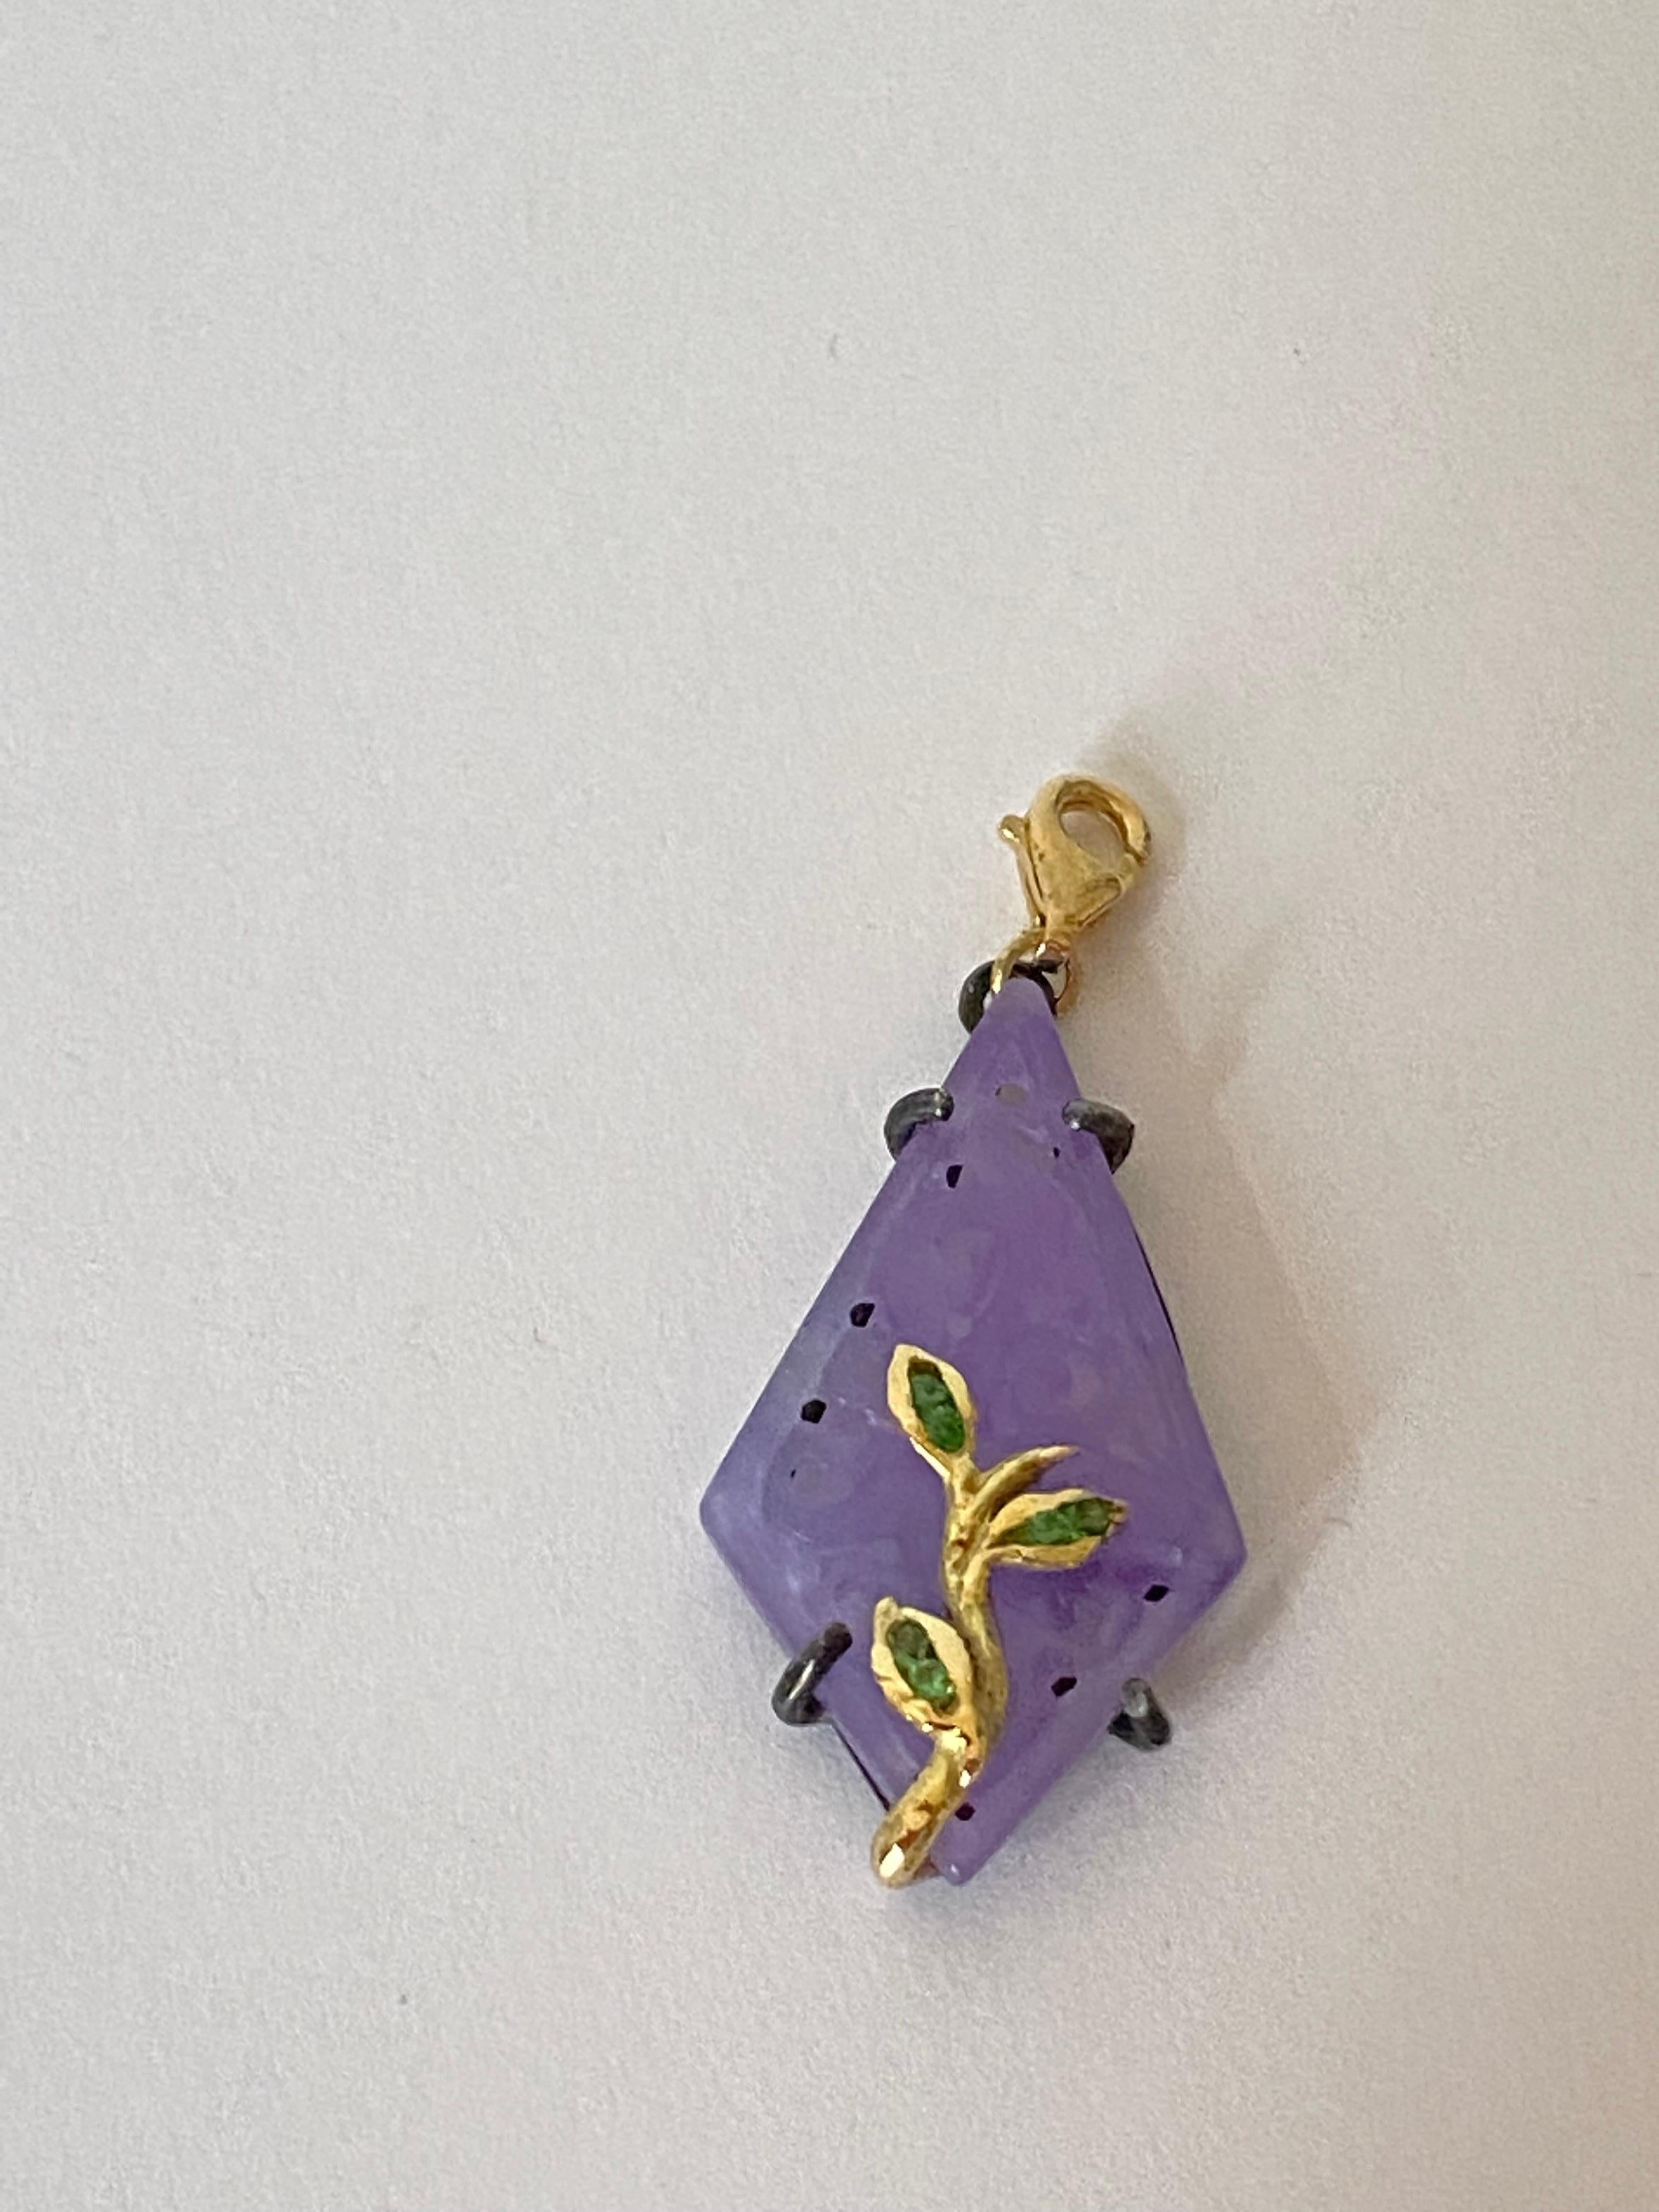 Purple Jade Charm and 18 K Yellow Gold Chain Art Deco Style Pendant Necklace For Sale 7